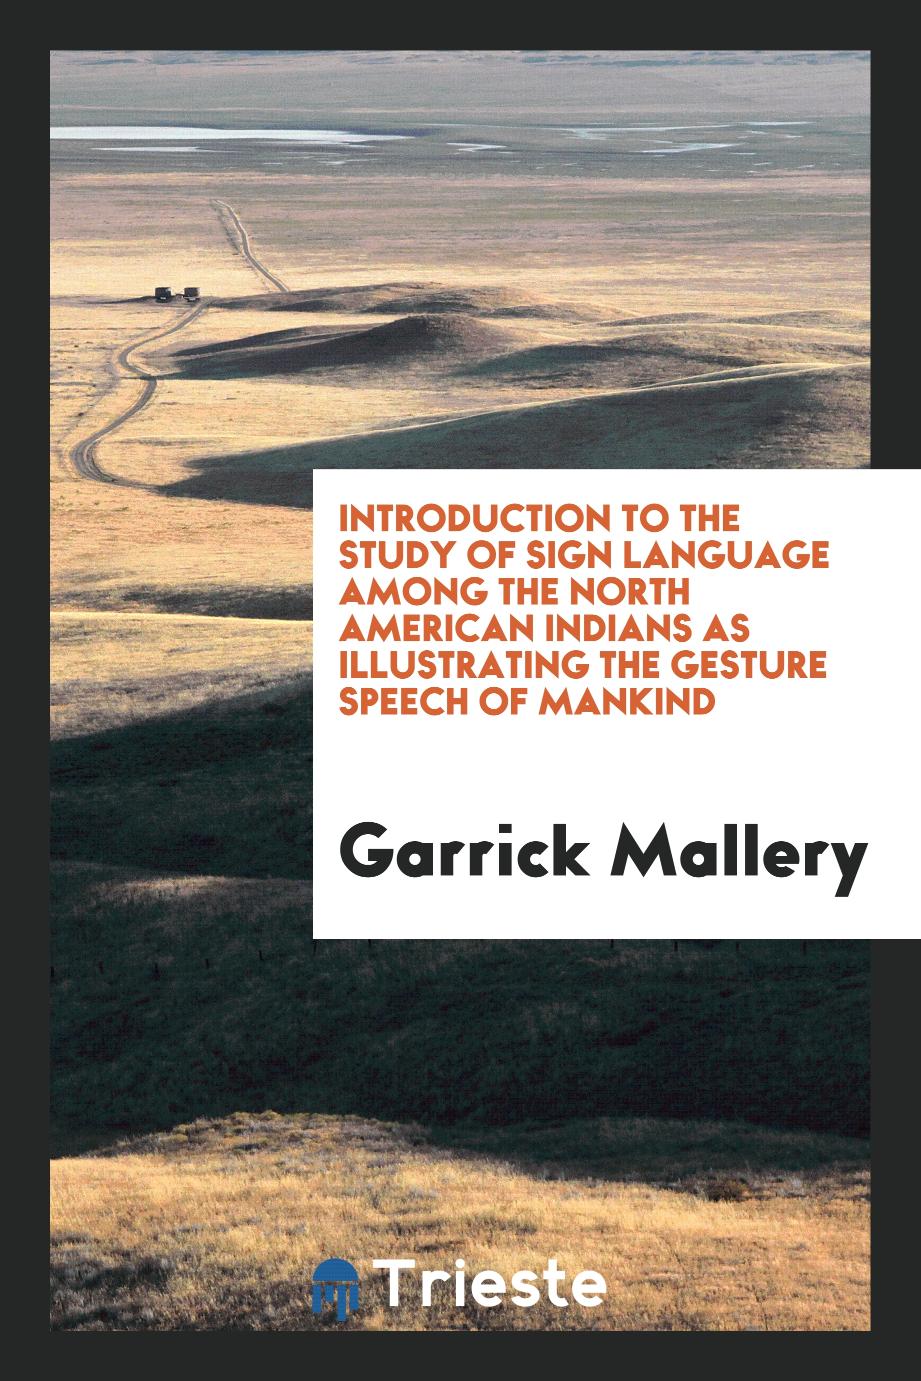 Introduction to the Study of Sign Language Among the North American Indians as illustrating the gesture speech of mankind